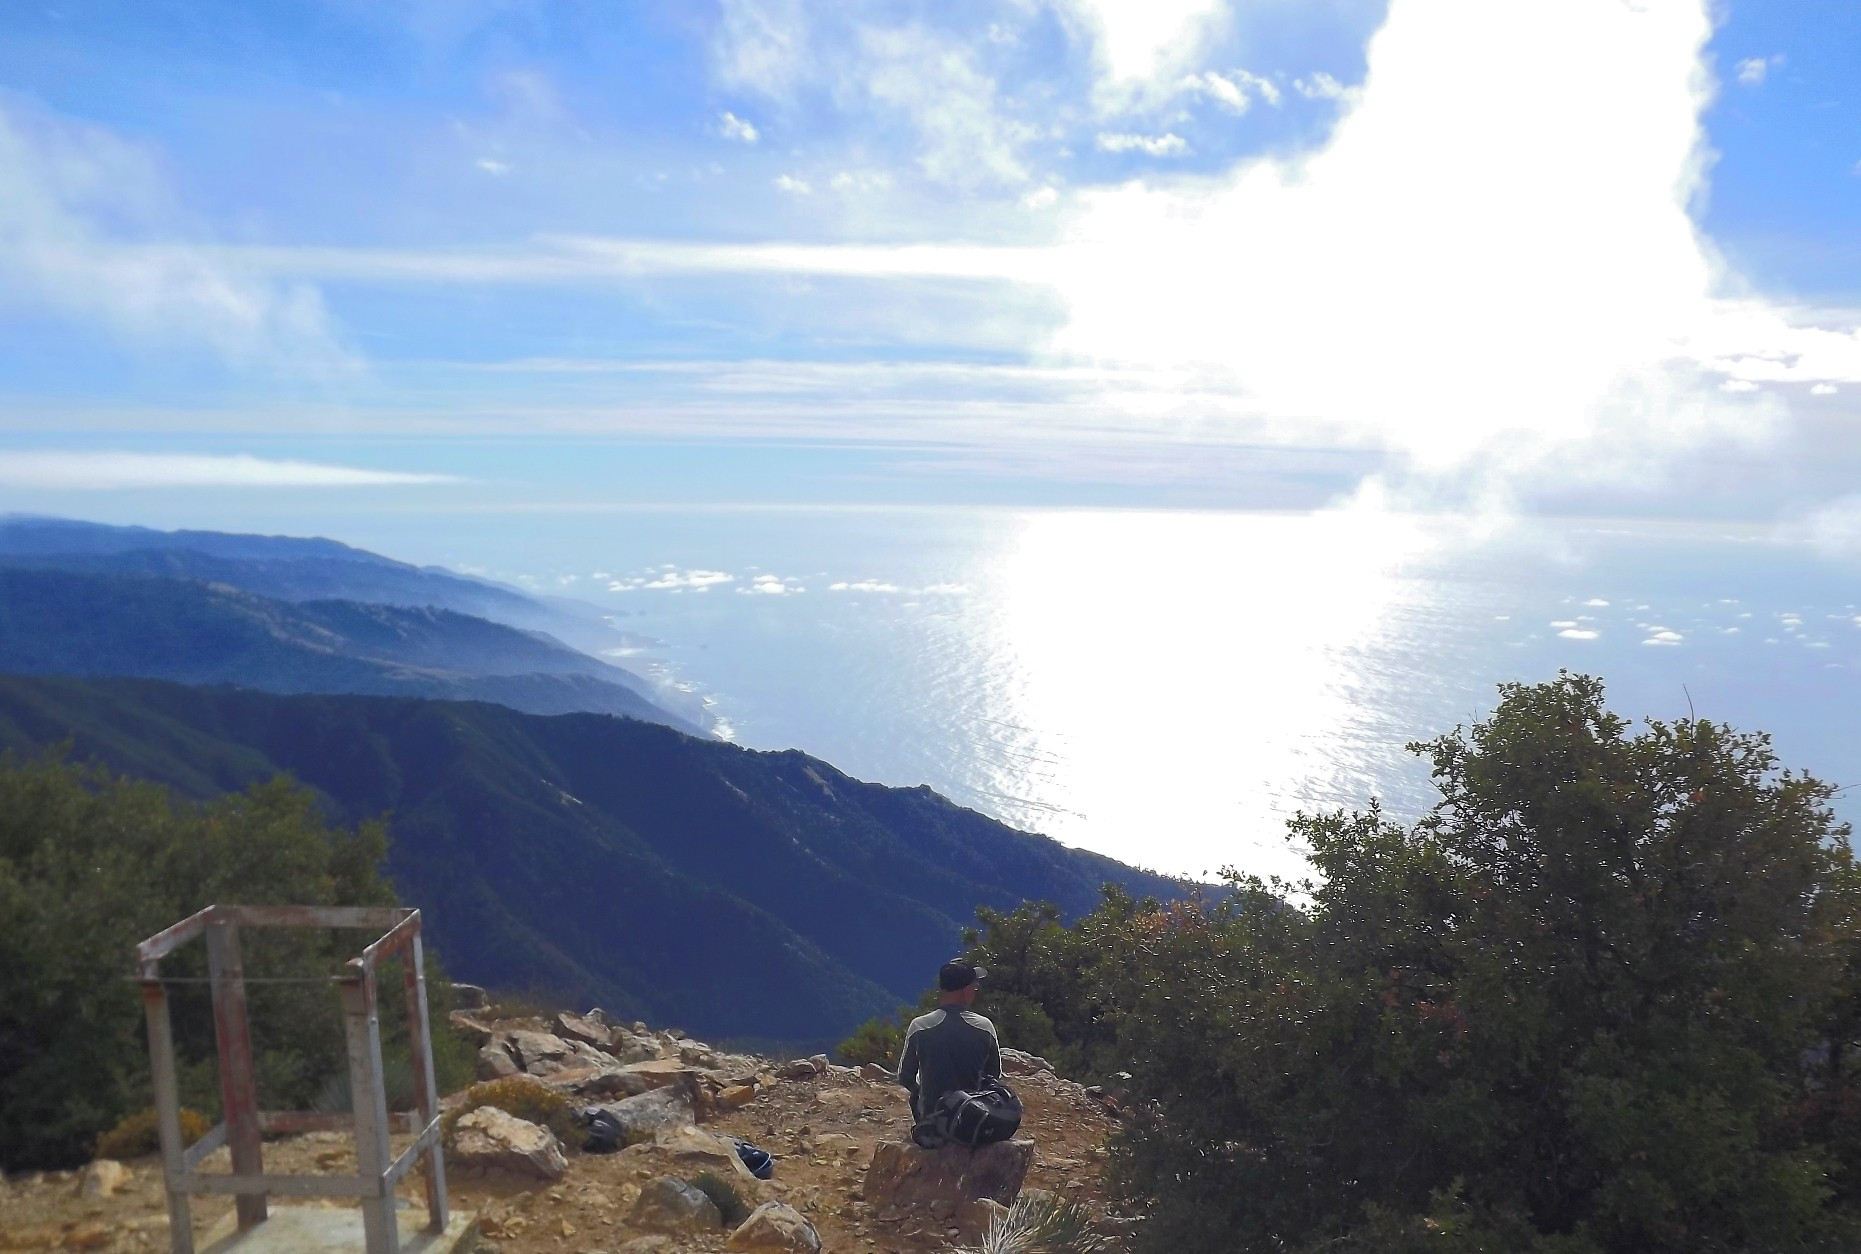 From 5155-foot summit of Cone Peak Mike looks over the Pacific Ocean and Big Sur Coast. California, USA